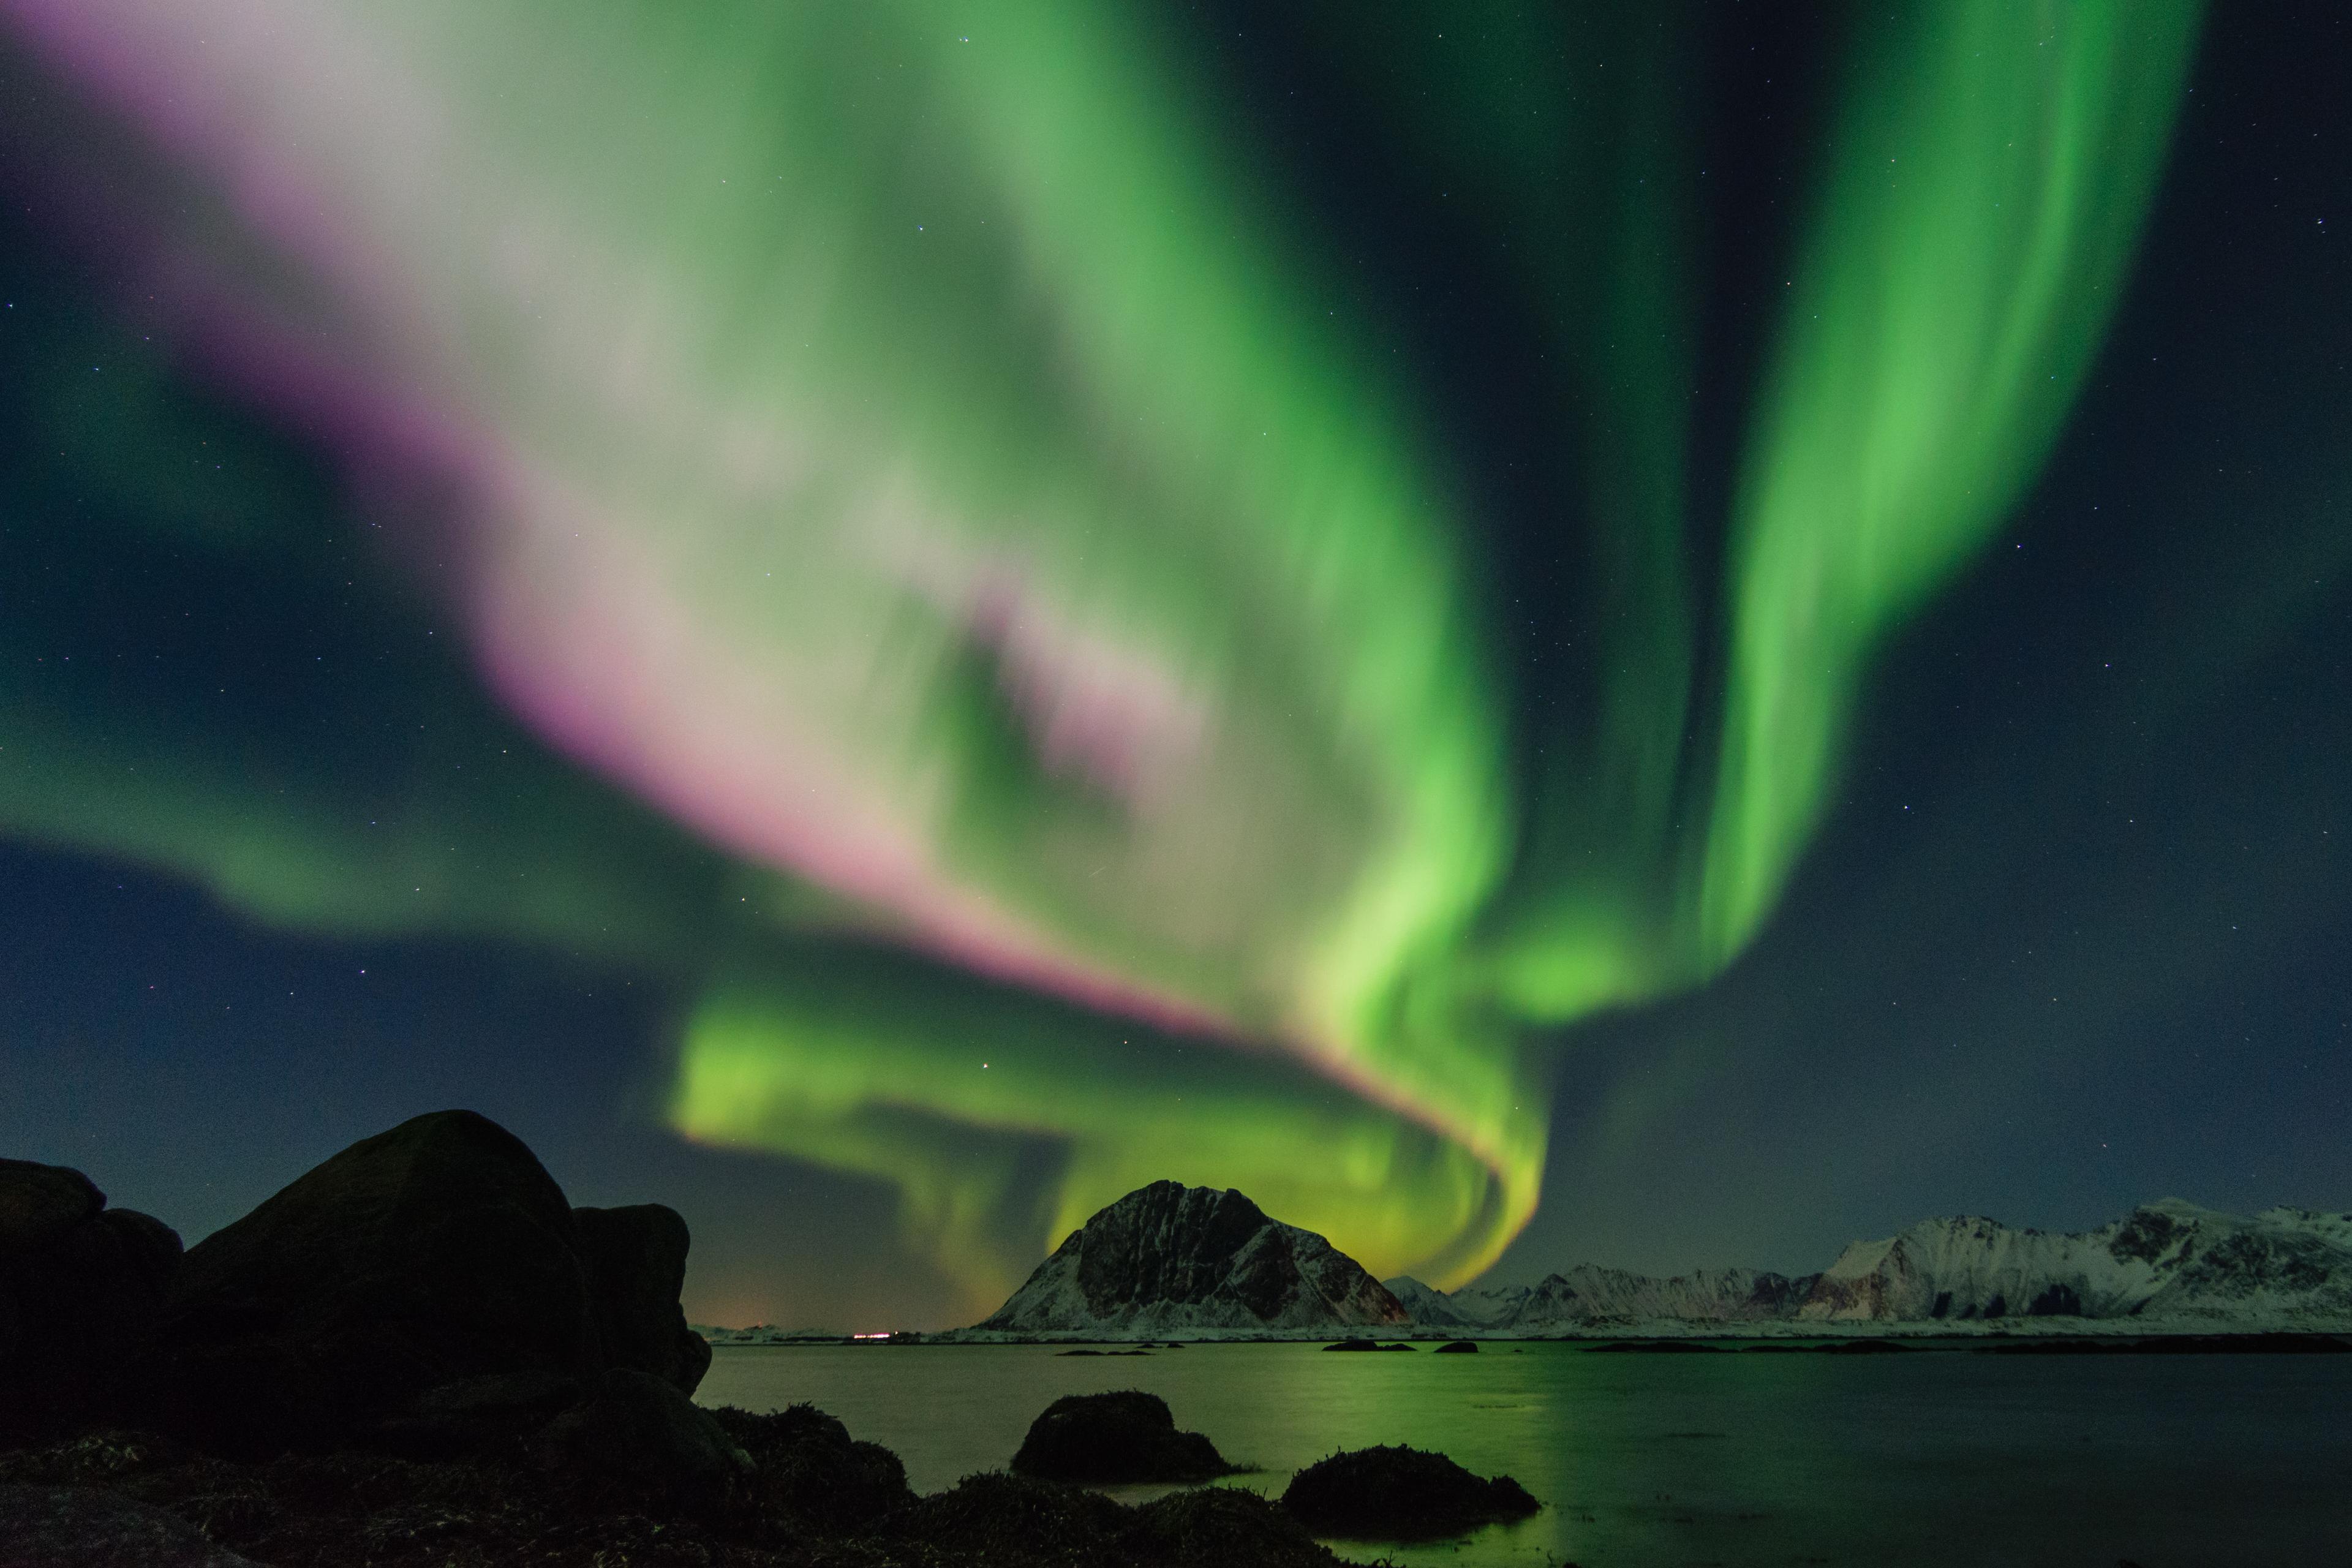 A stunning aurora borealis swirls in the sky, with shades of green and pink, over a serene coastal landscape with mountains in the background.